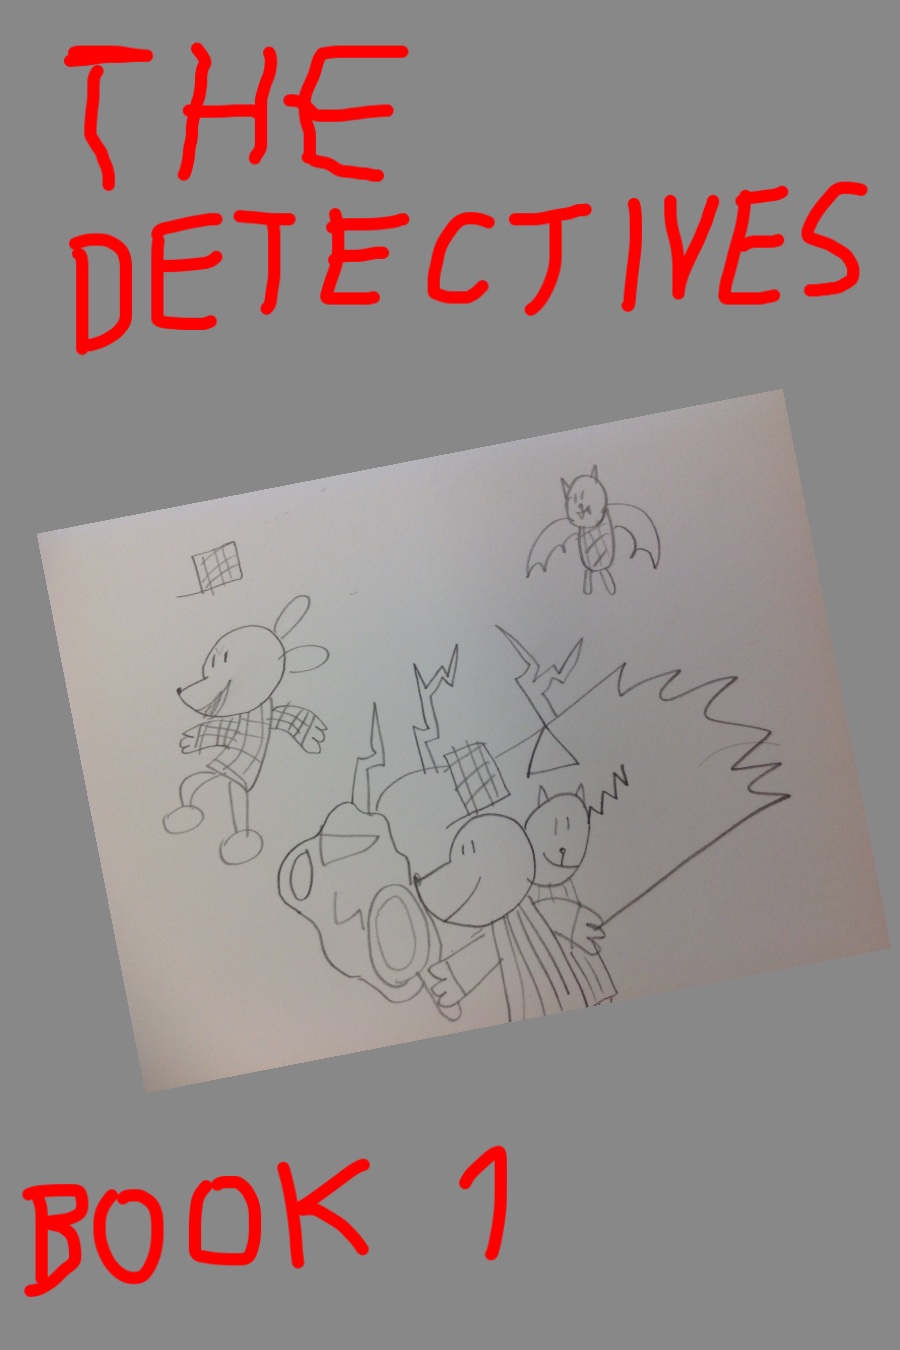 THE DETECTIVES by Braydon Y